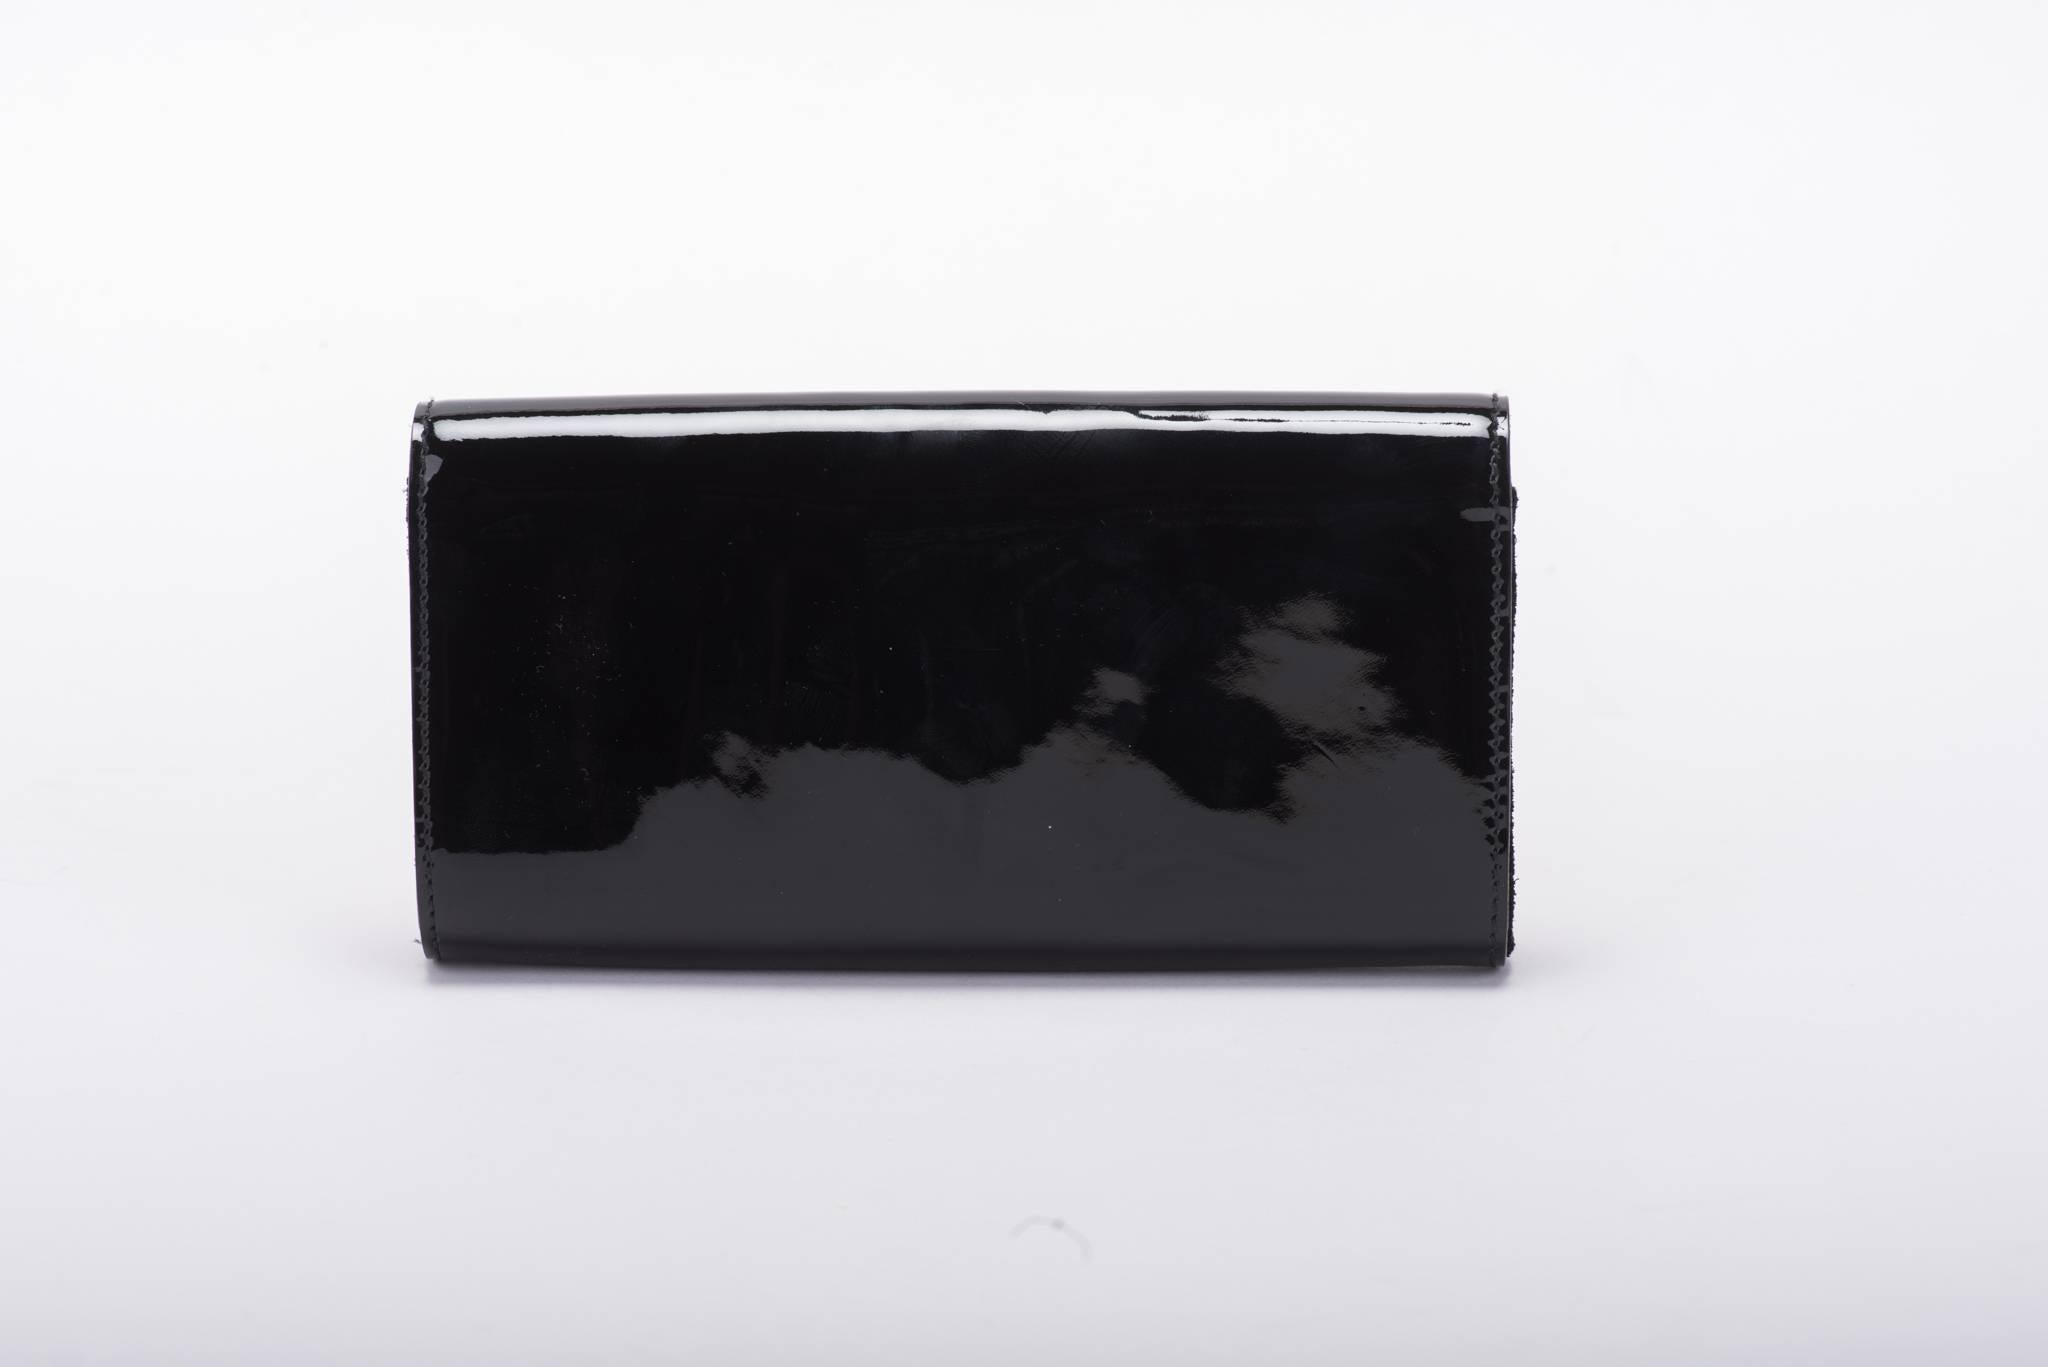 Gucci unworn black patent leather evening clutch with center black gem oversized stone. Brand new with plastic still in the back of clasp. Comes with original dust cover.